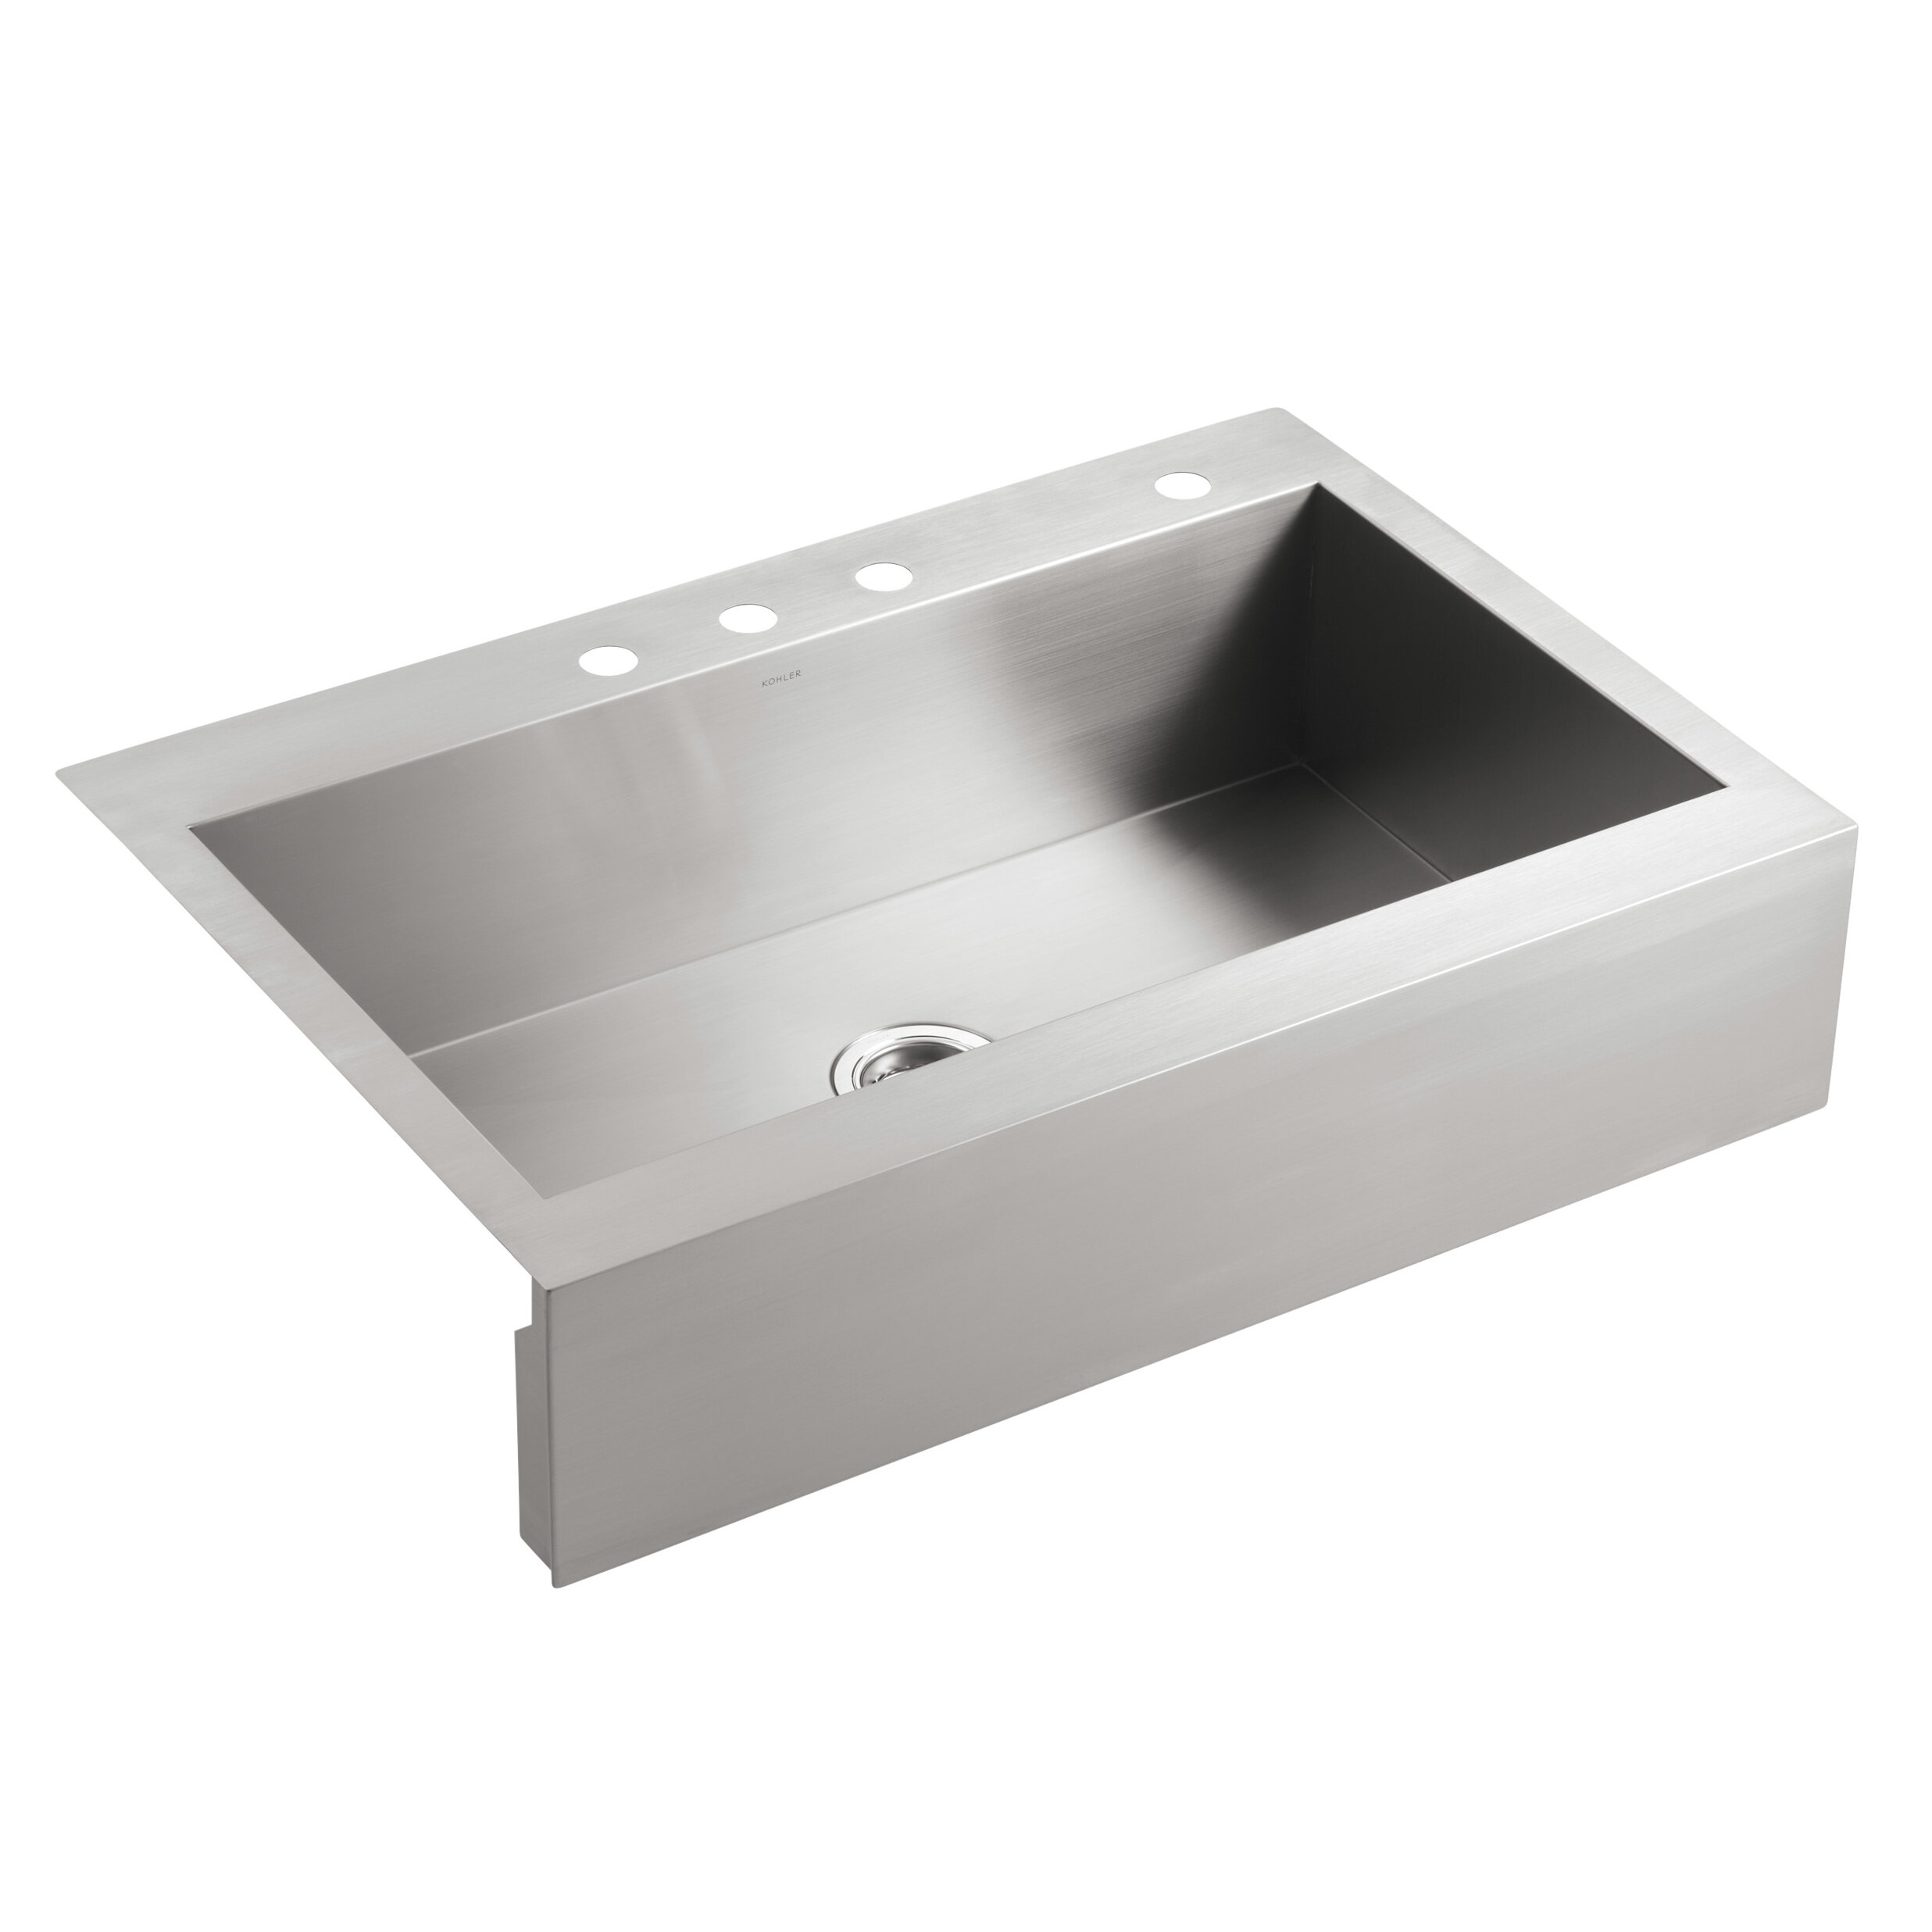 Vault 35 3 4 X 24 5 16 X 9 5 16 Top Mount Single Bowl Stainless Steel Kitchen Sink With Shortened Apron Front For 36 Cabinet